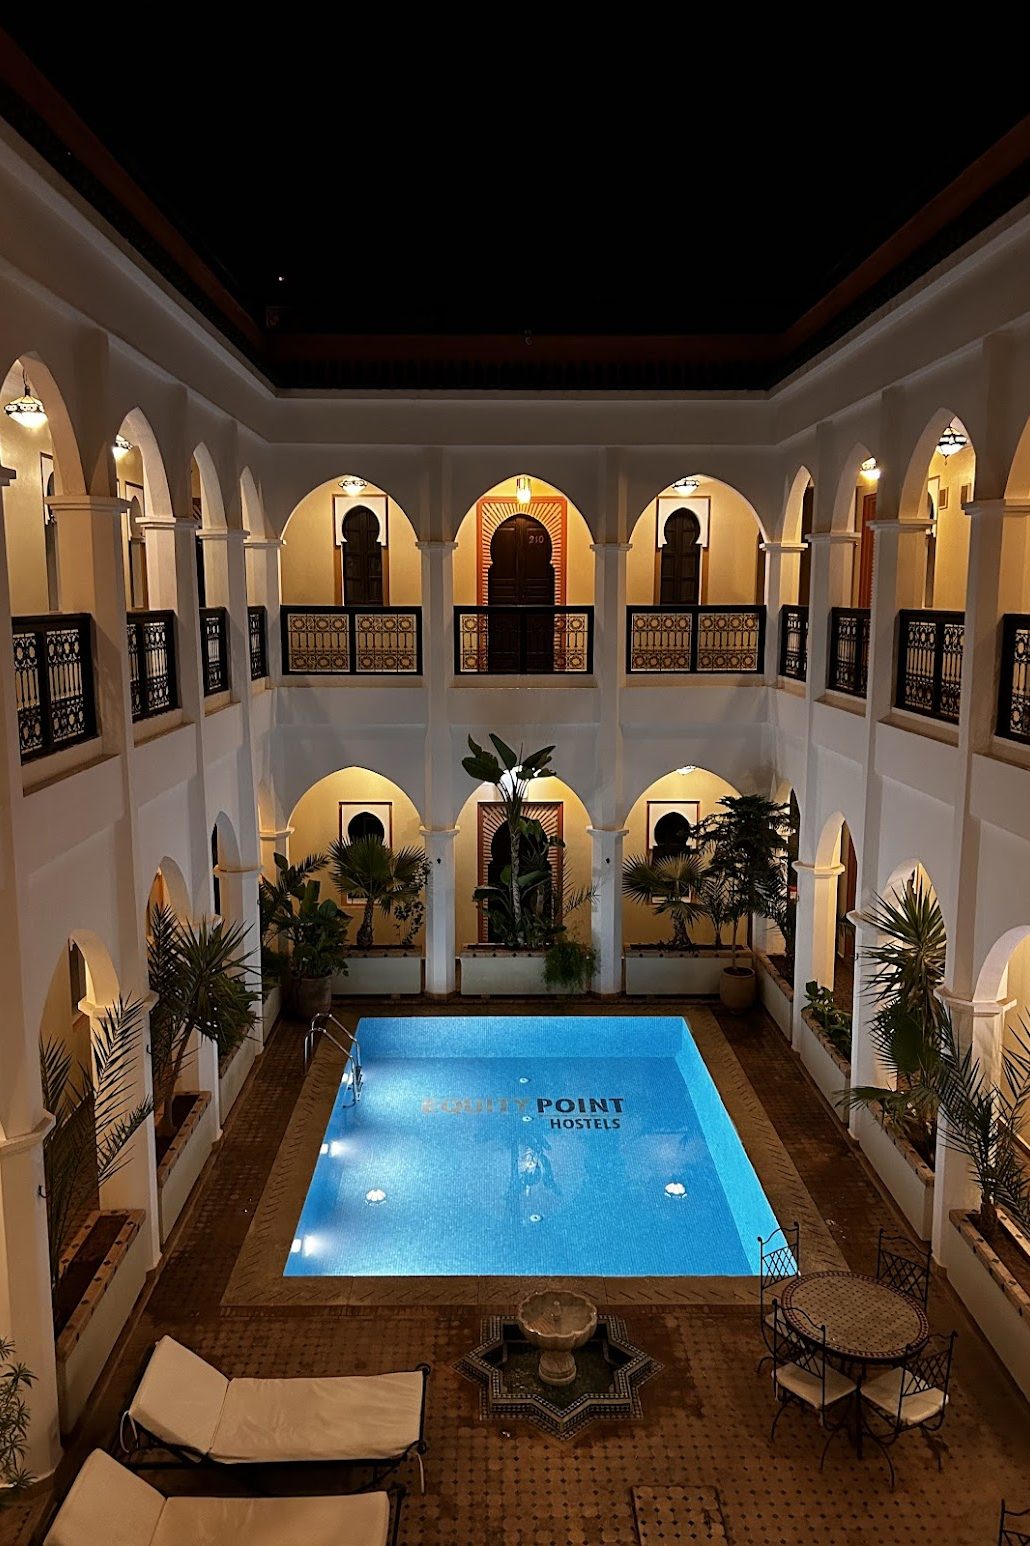 An empty riad courtyard at night with a pool, a table, decorative fountain, and lounge chairs.